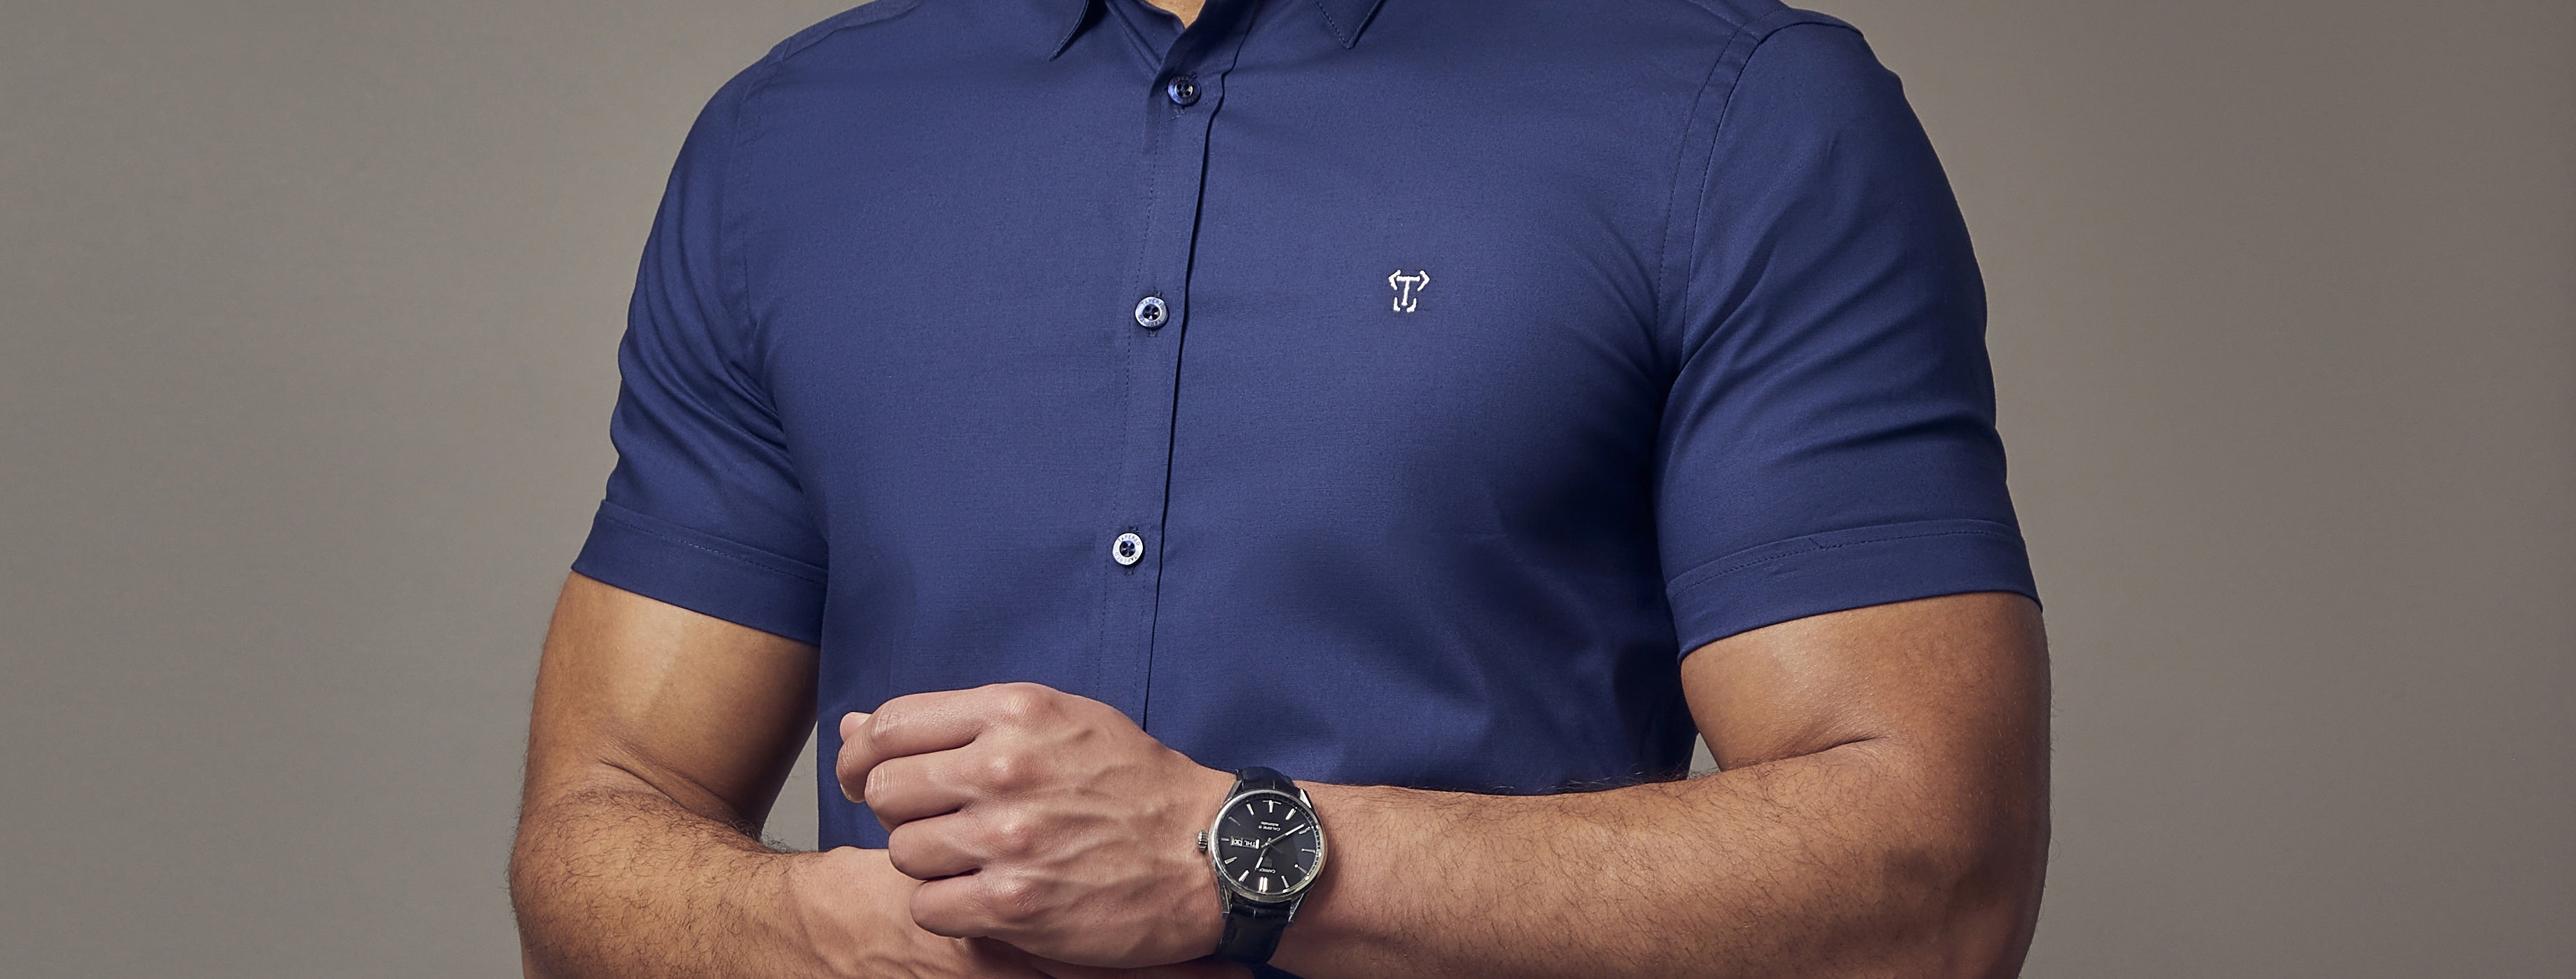 best short sleeve shirts for men by Tapered Menswear